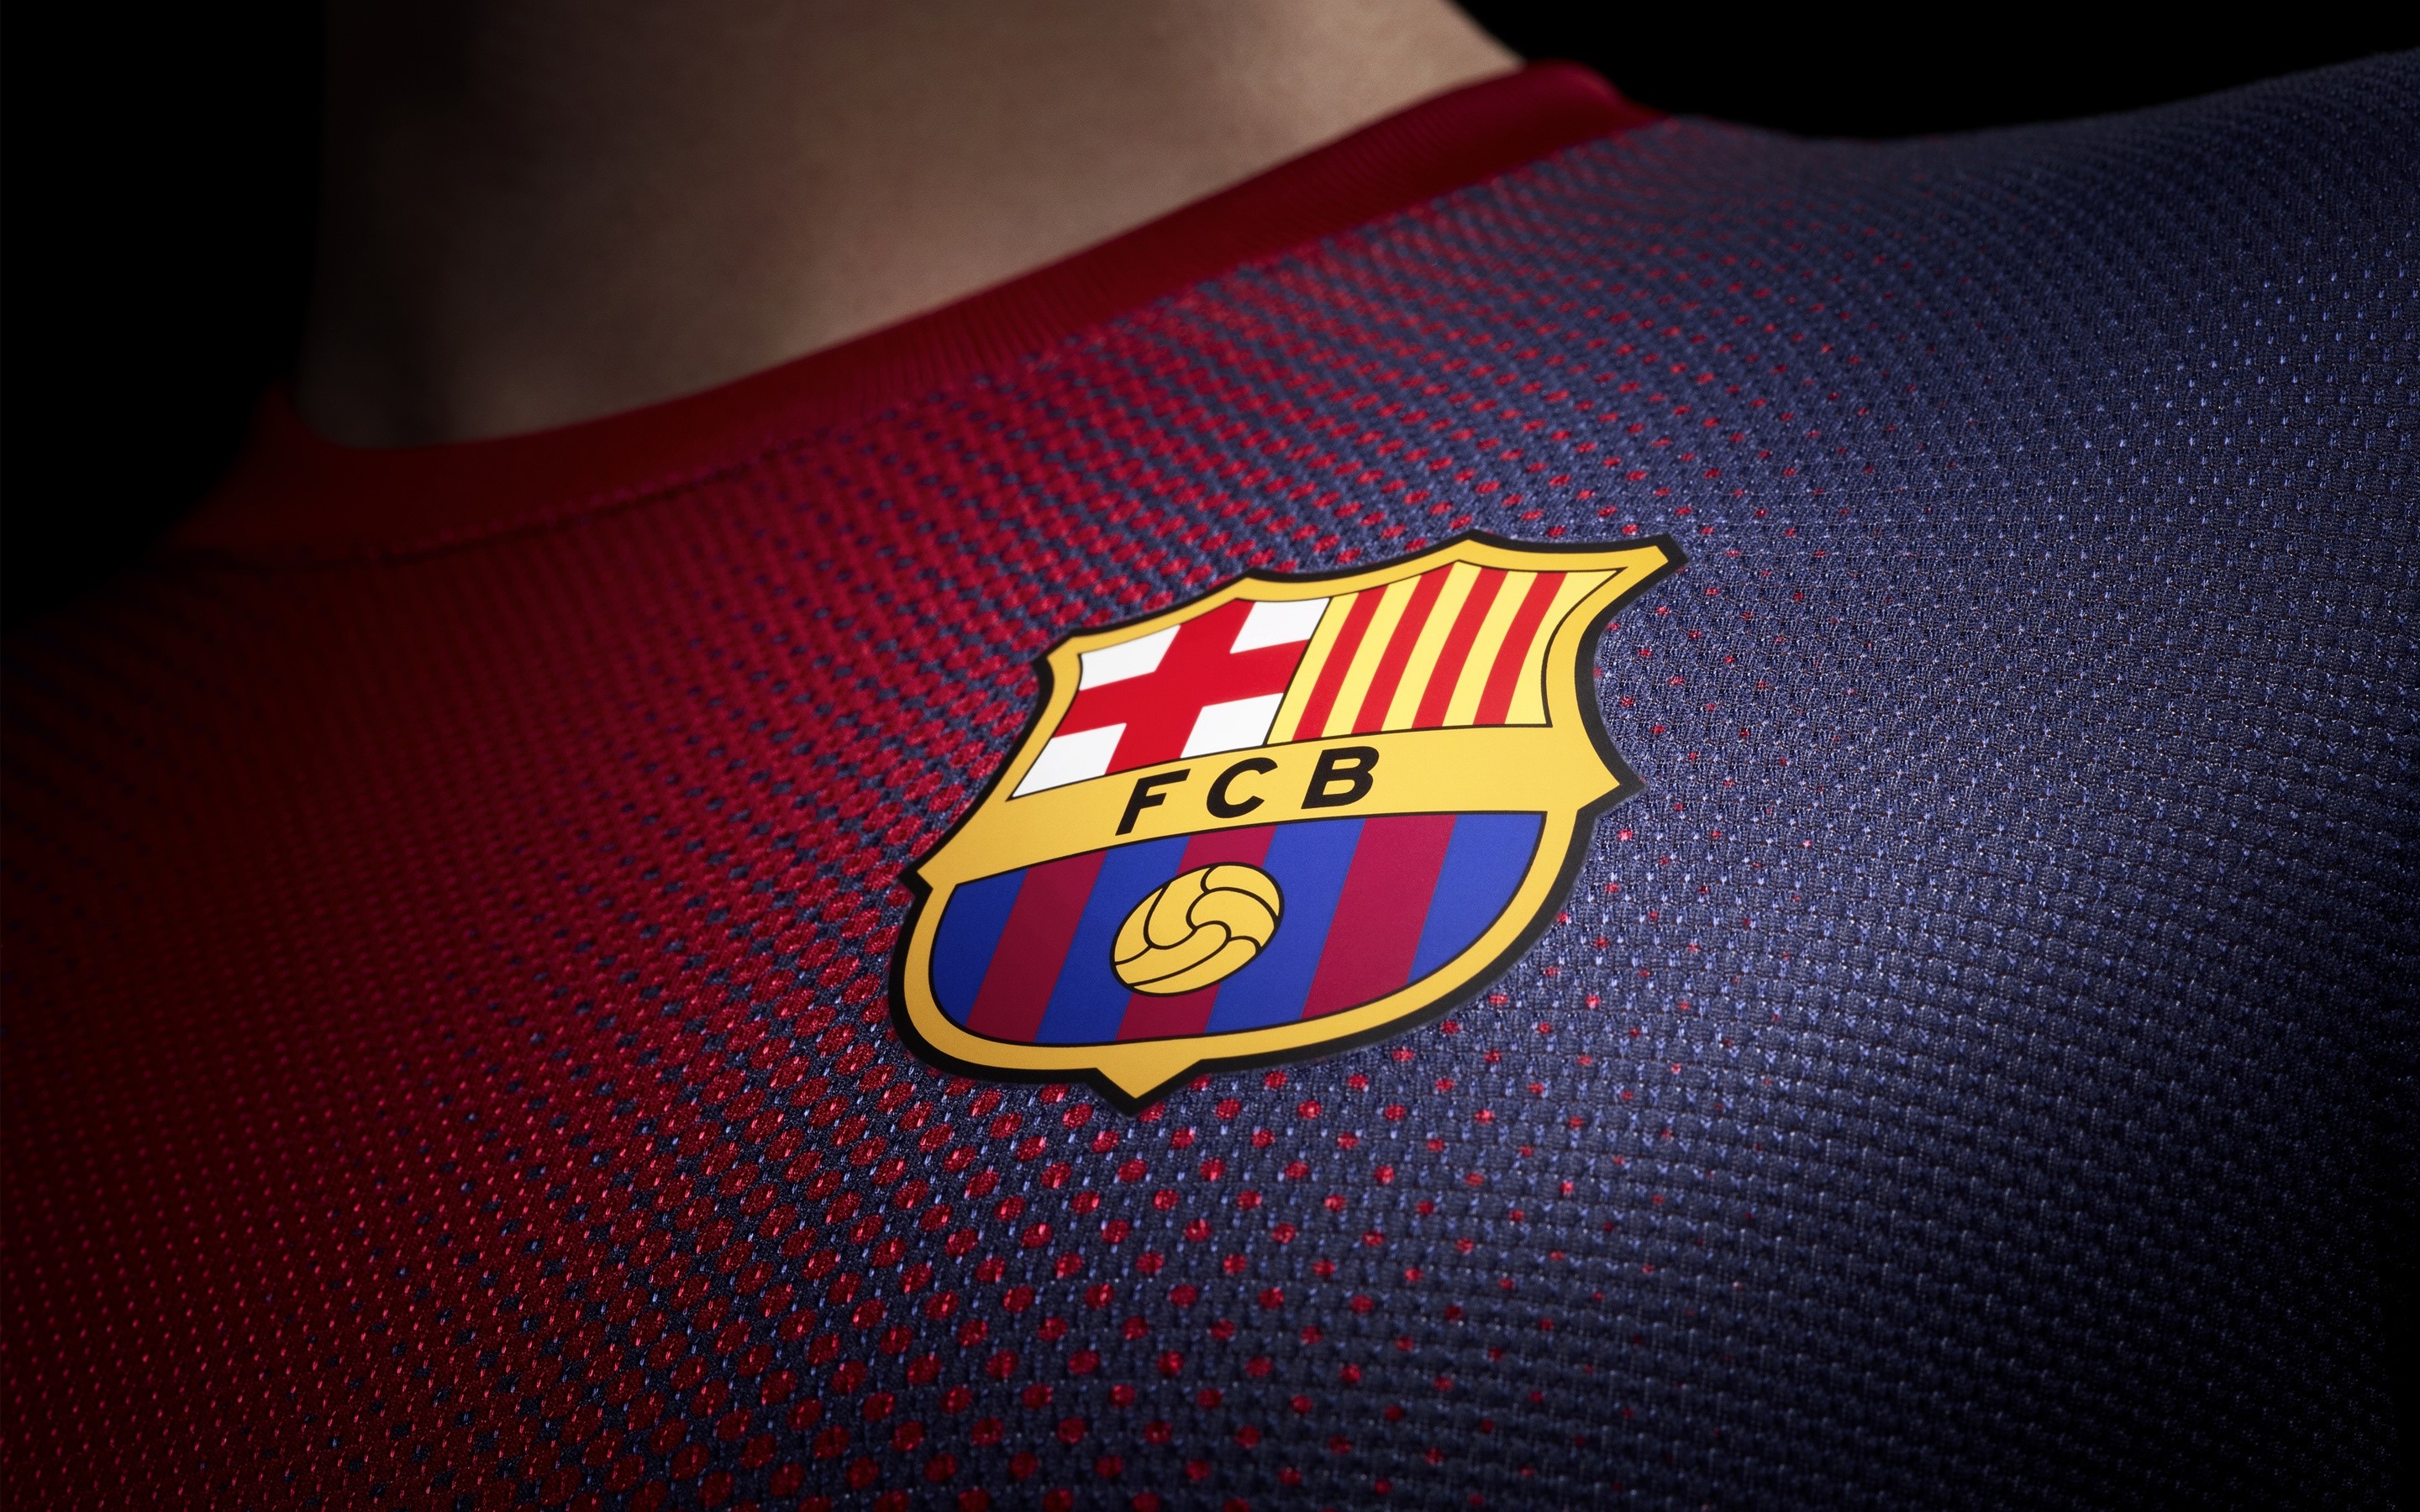 Background Pic Of Barcelona - HD Wallpaper 